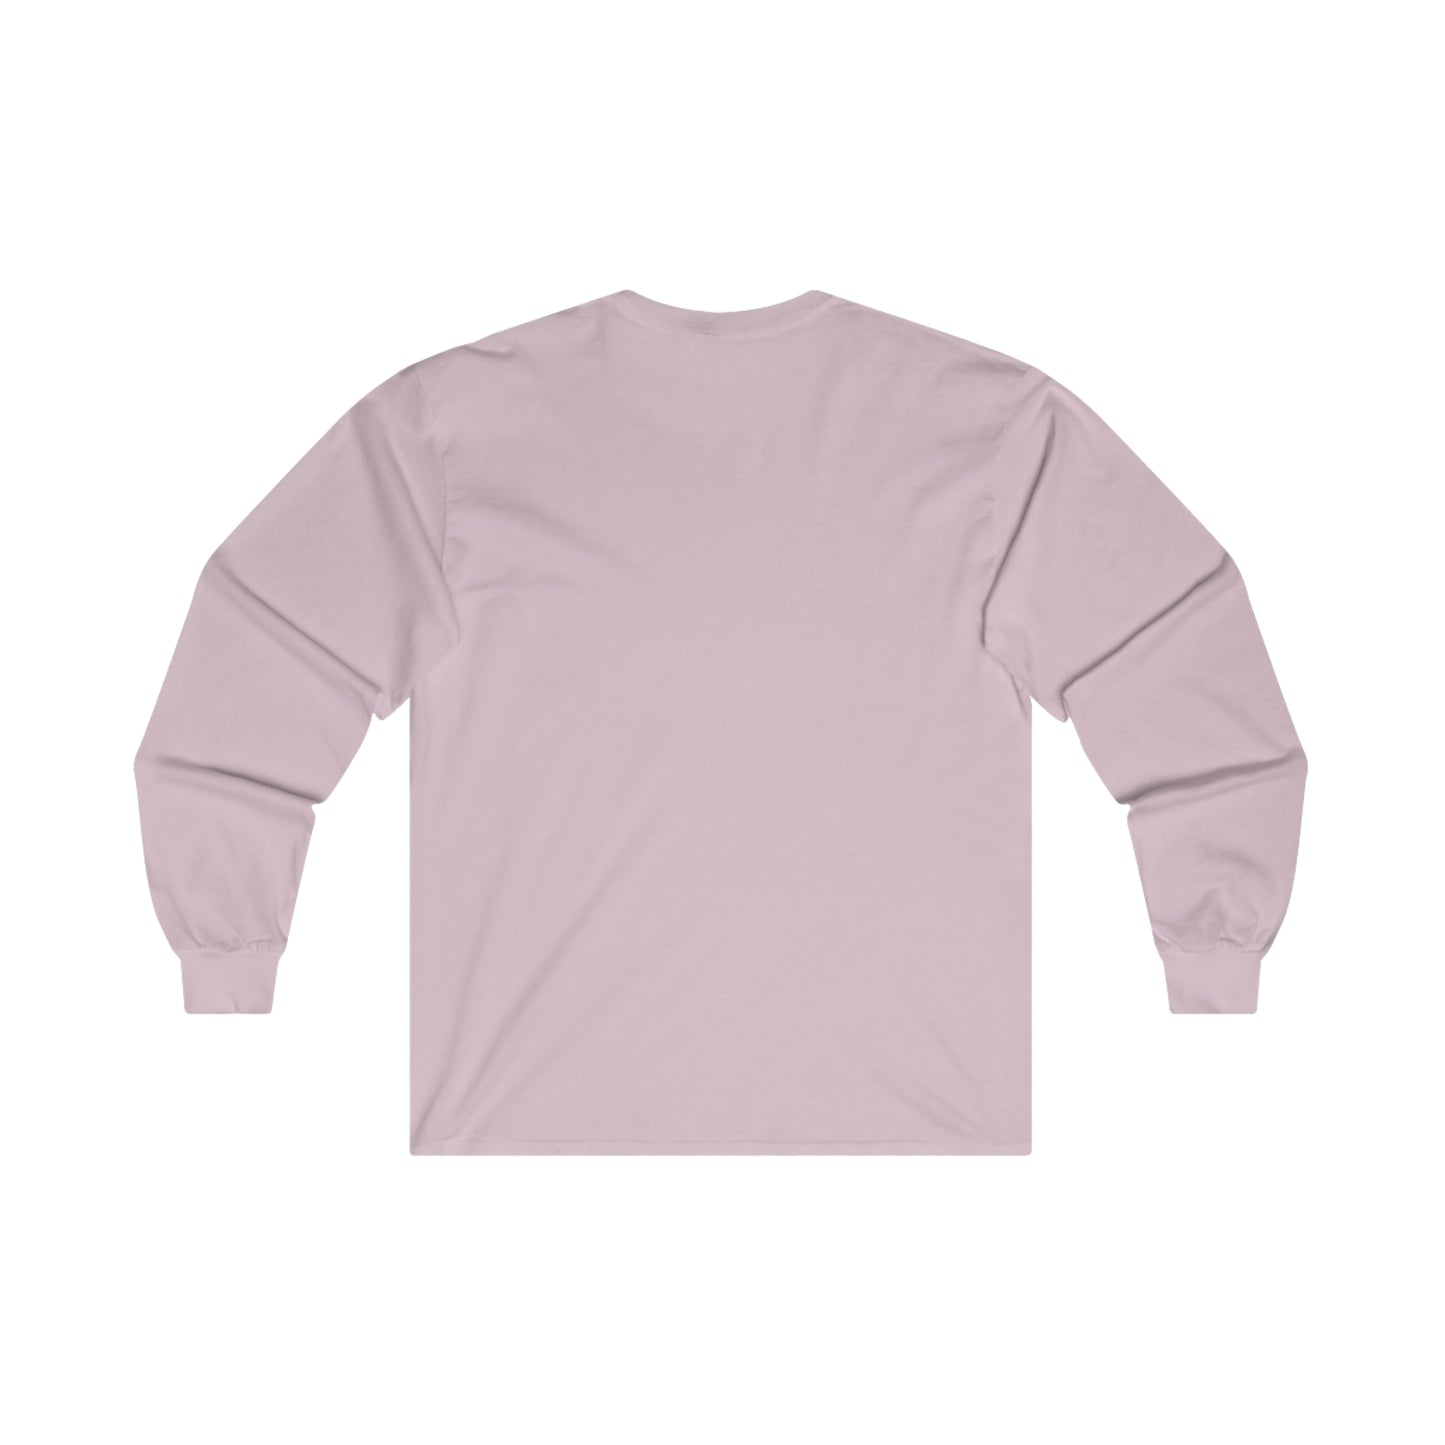 Happily Ever After - Long Sleeve Tee